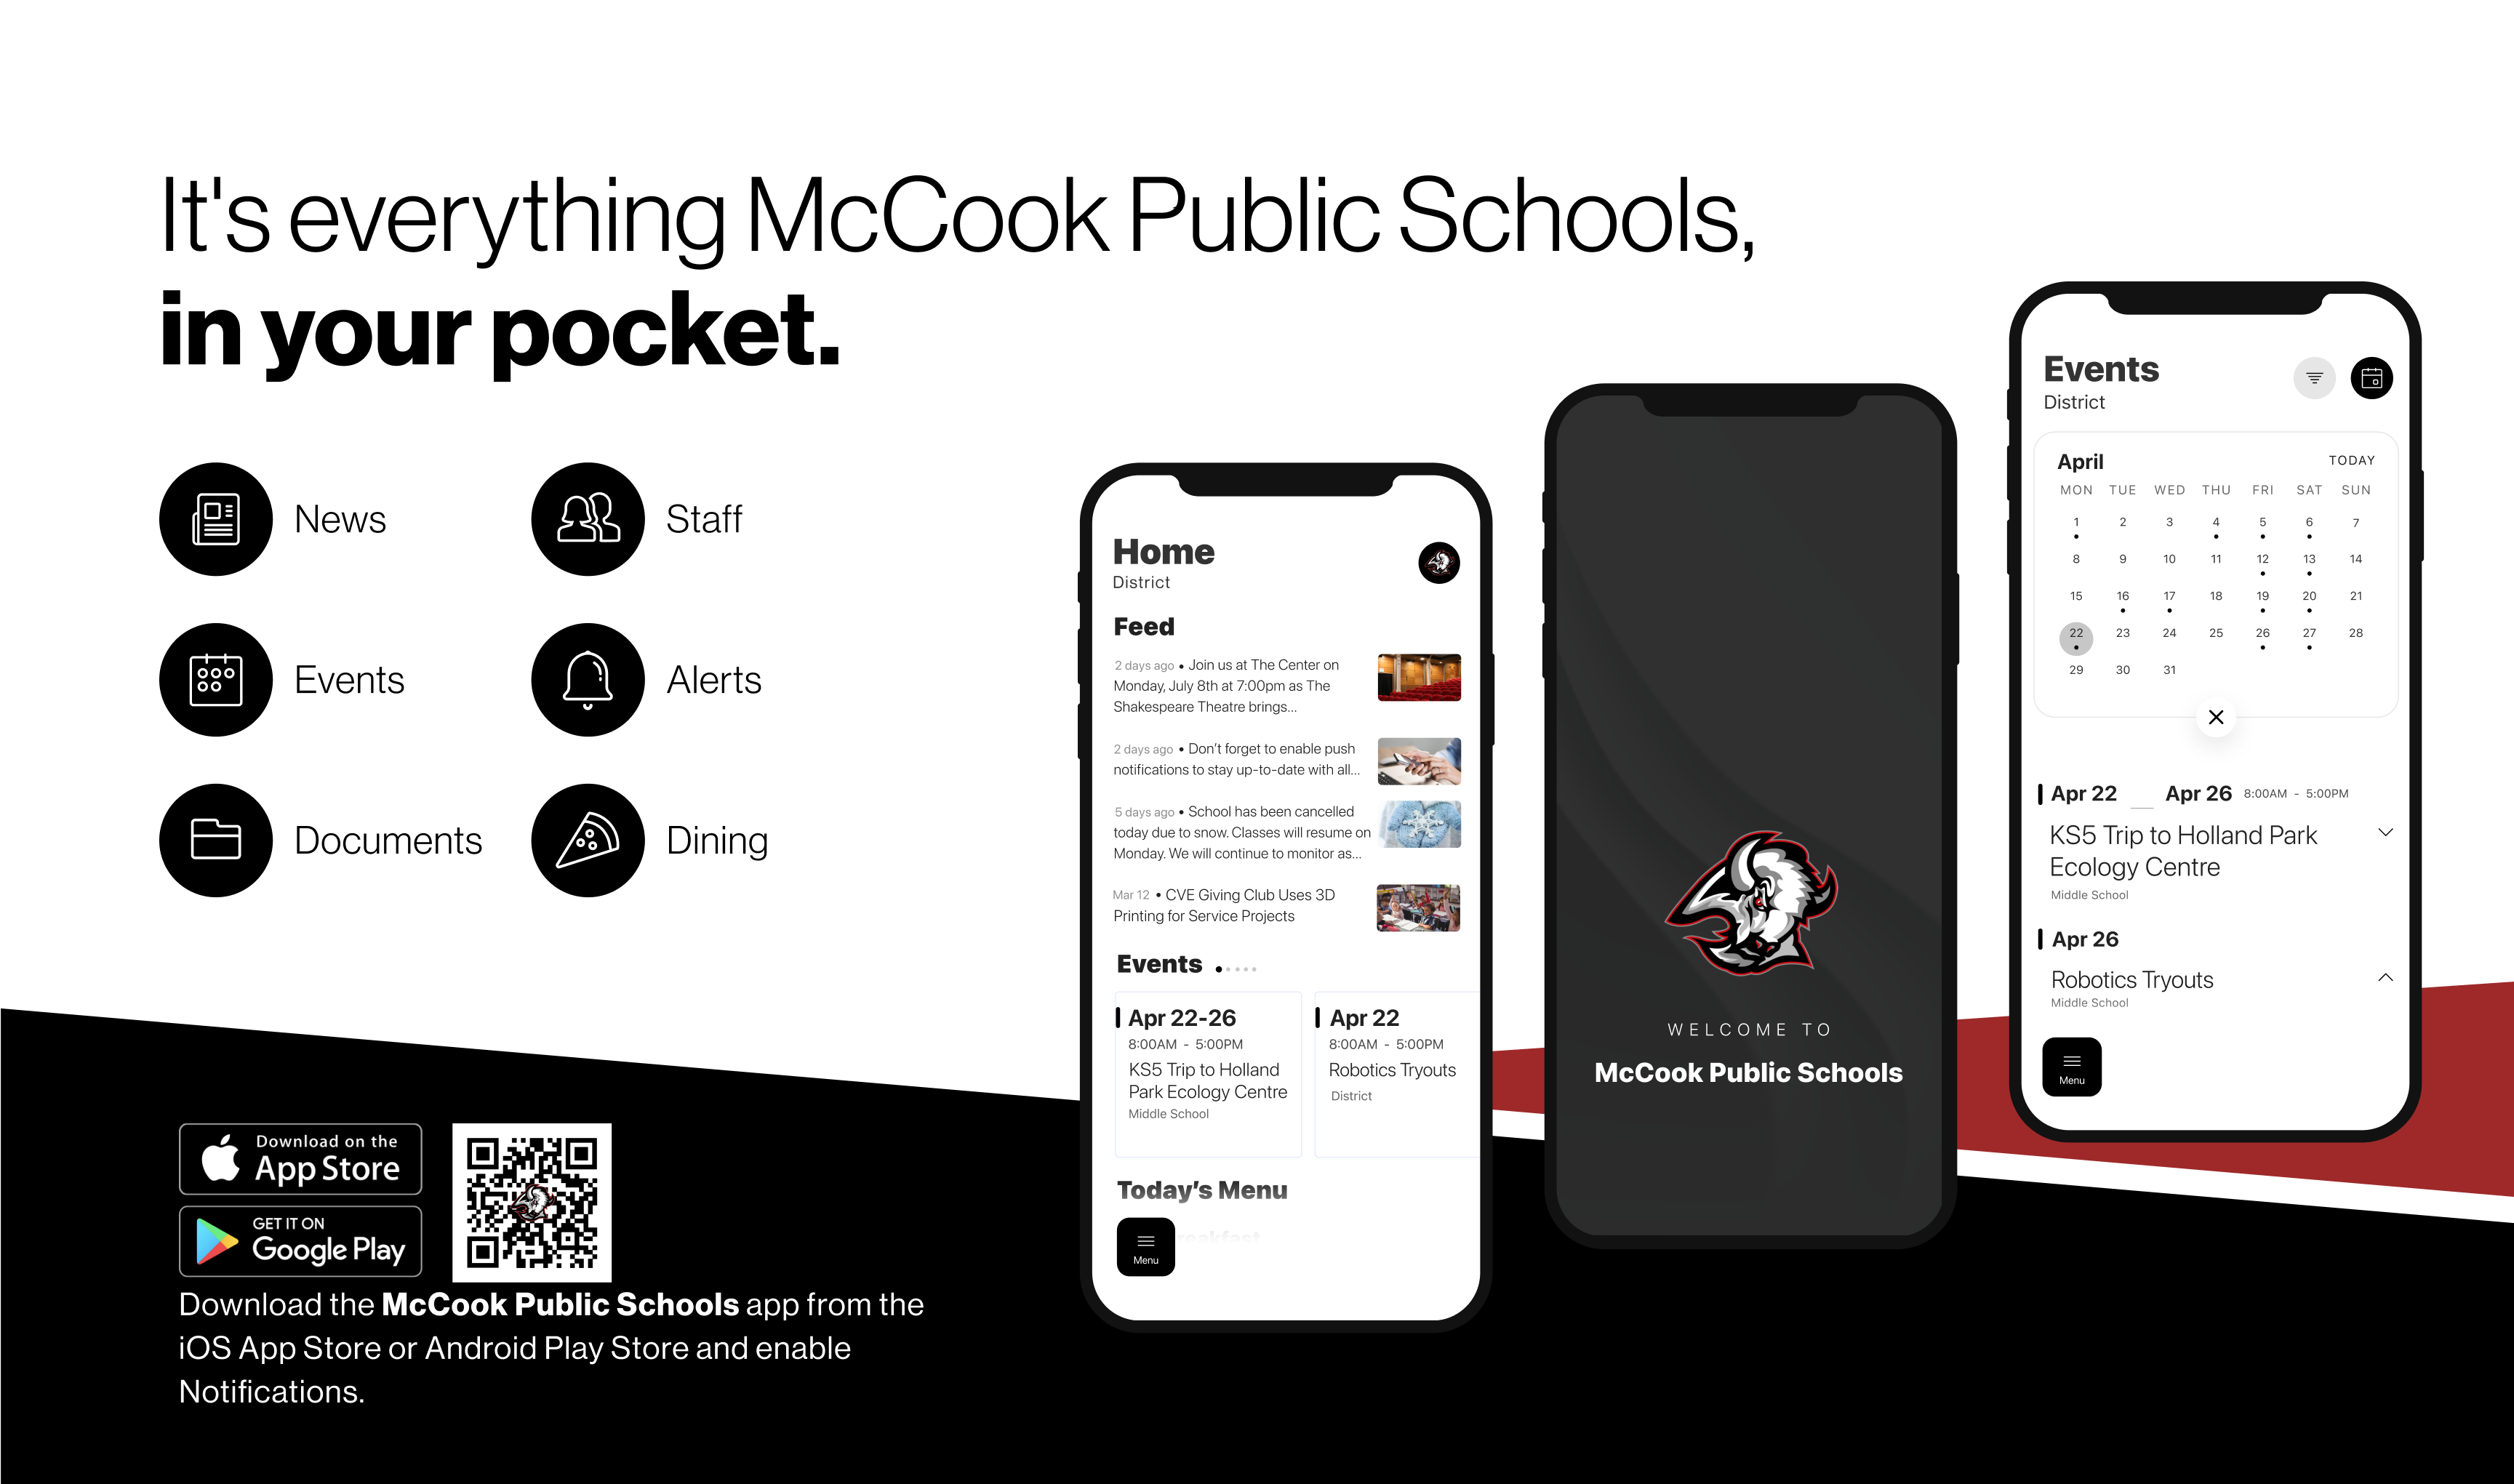 Advertisement: New App for McCook Public Schools. Download on the iOS app store or Android play store.